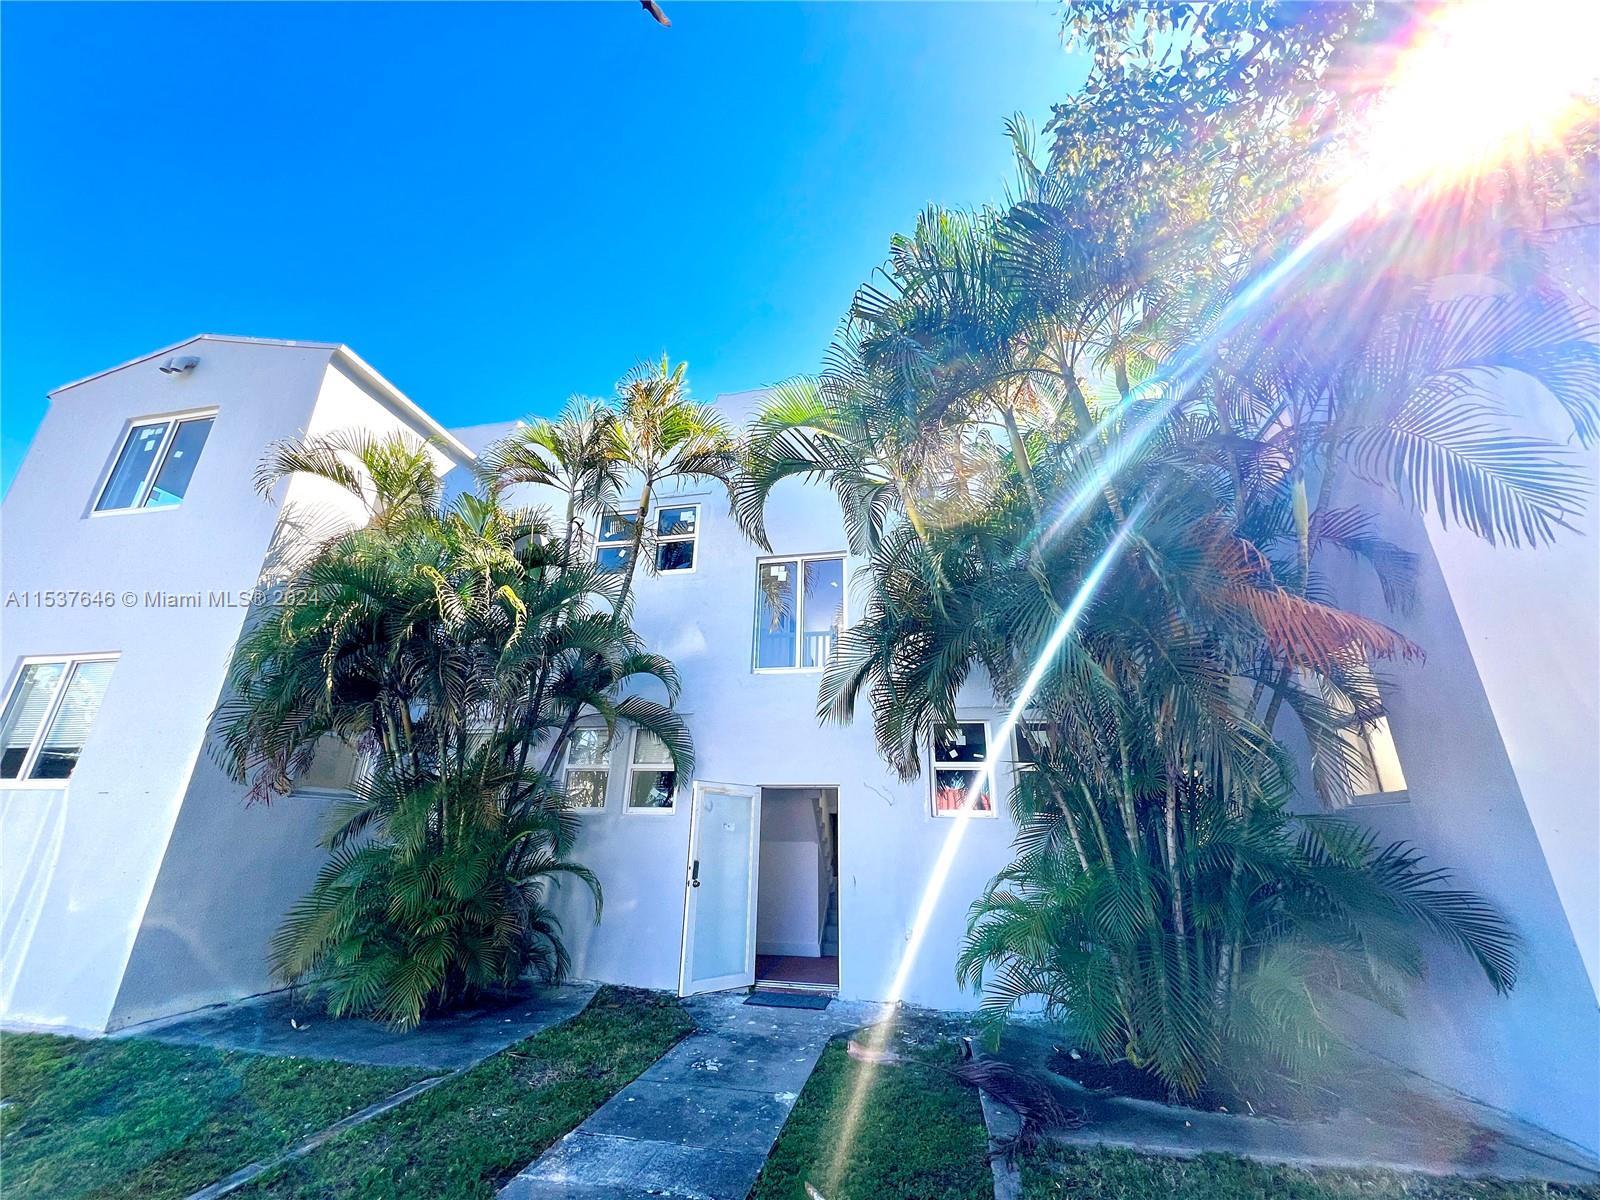 Photo of 1015 S 17th Ave #6 in Hollywood, FL